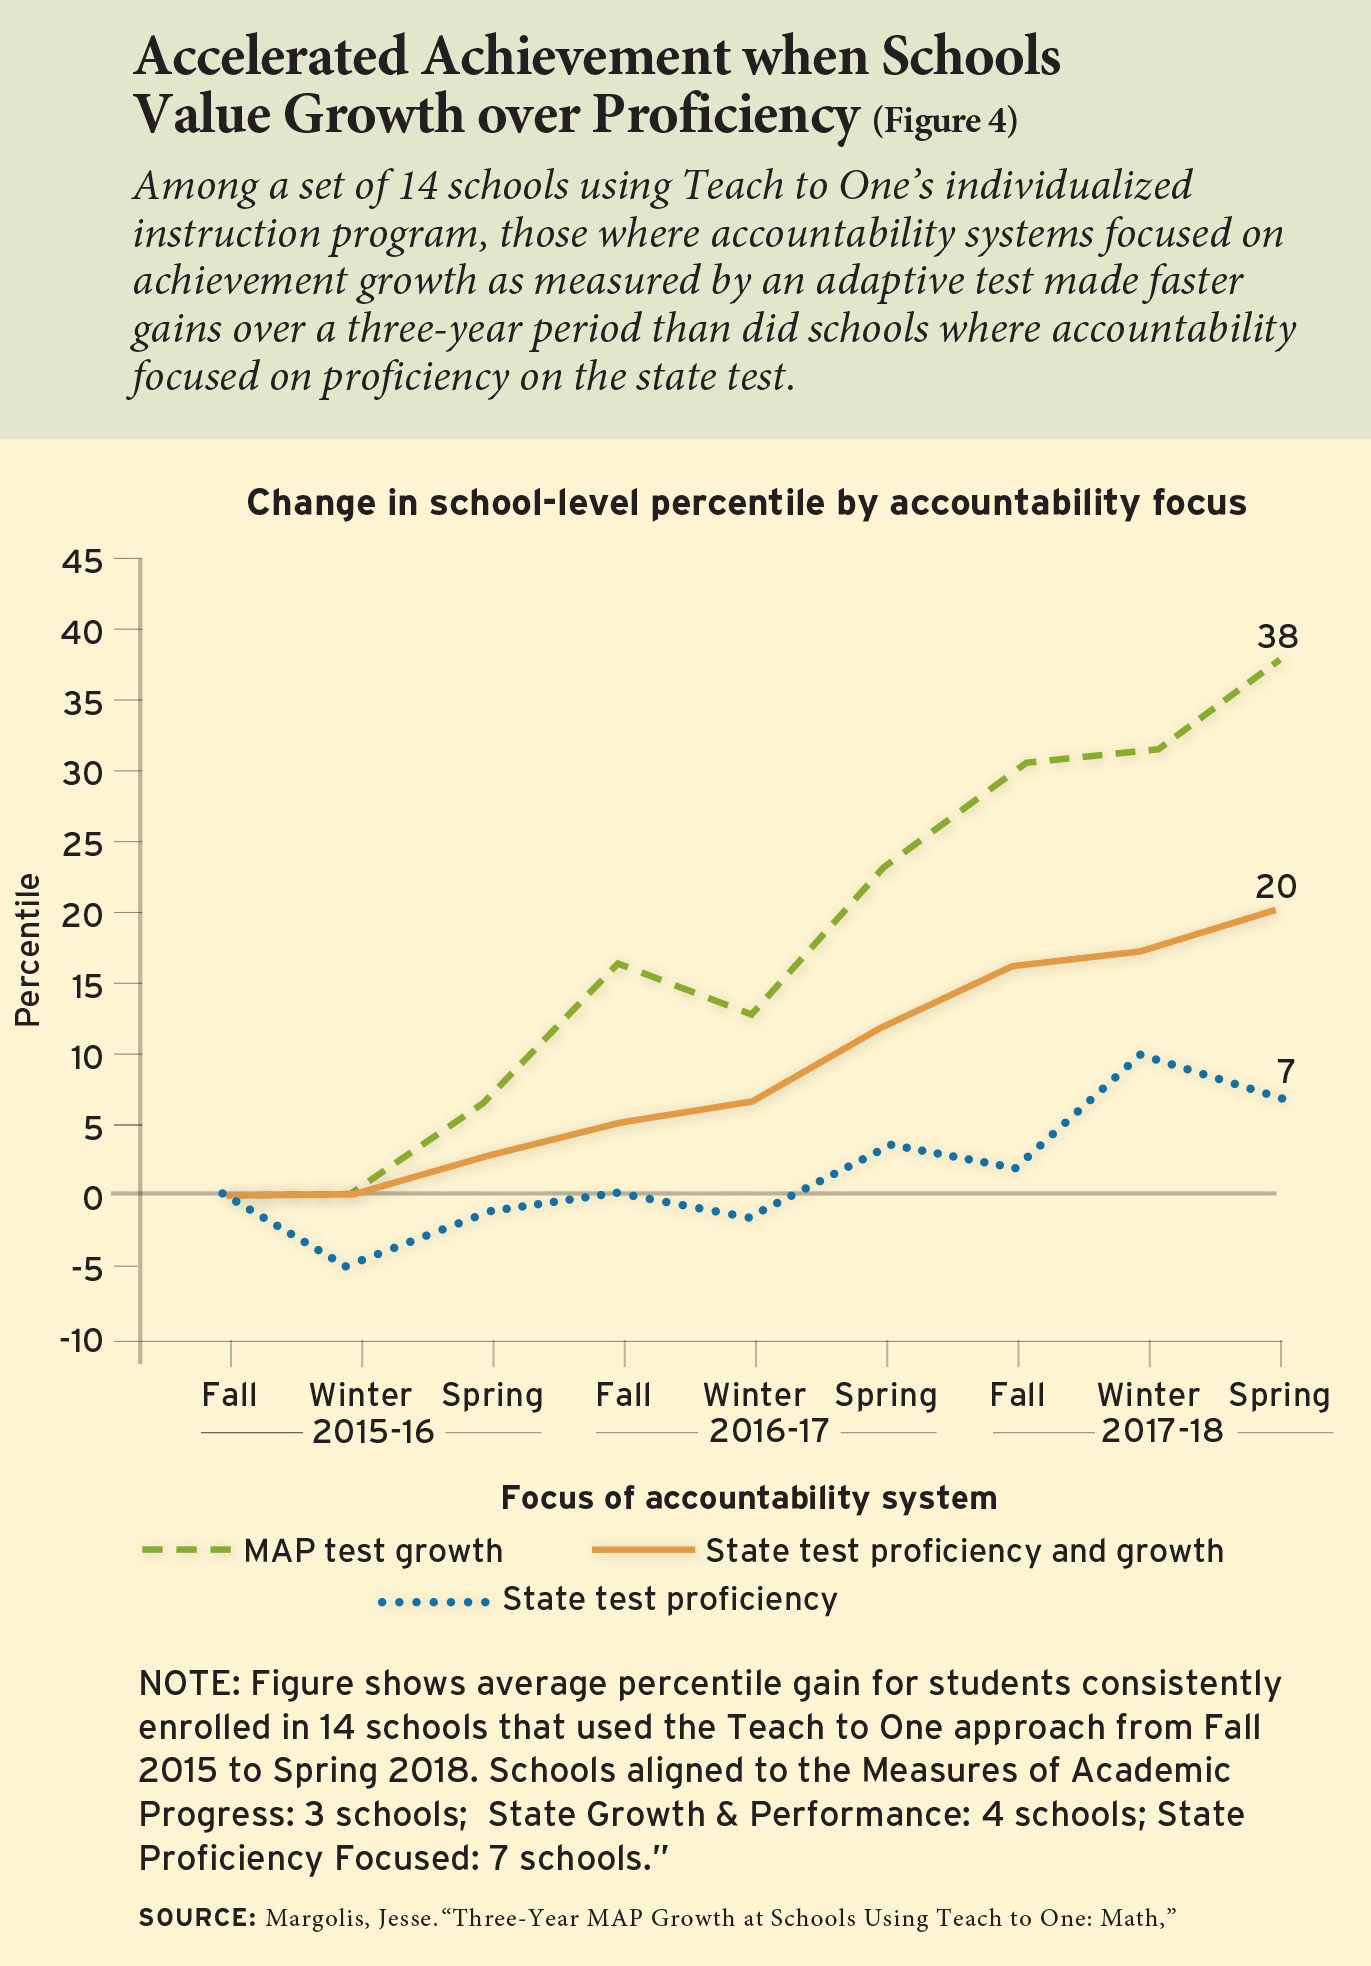 Accelerated Achievement when Schools Value Growth over Proficiency (Figure 4)